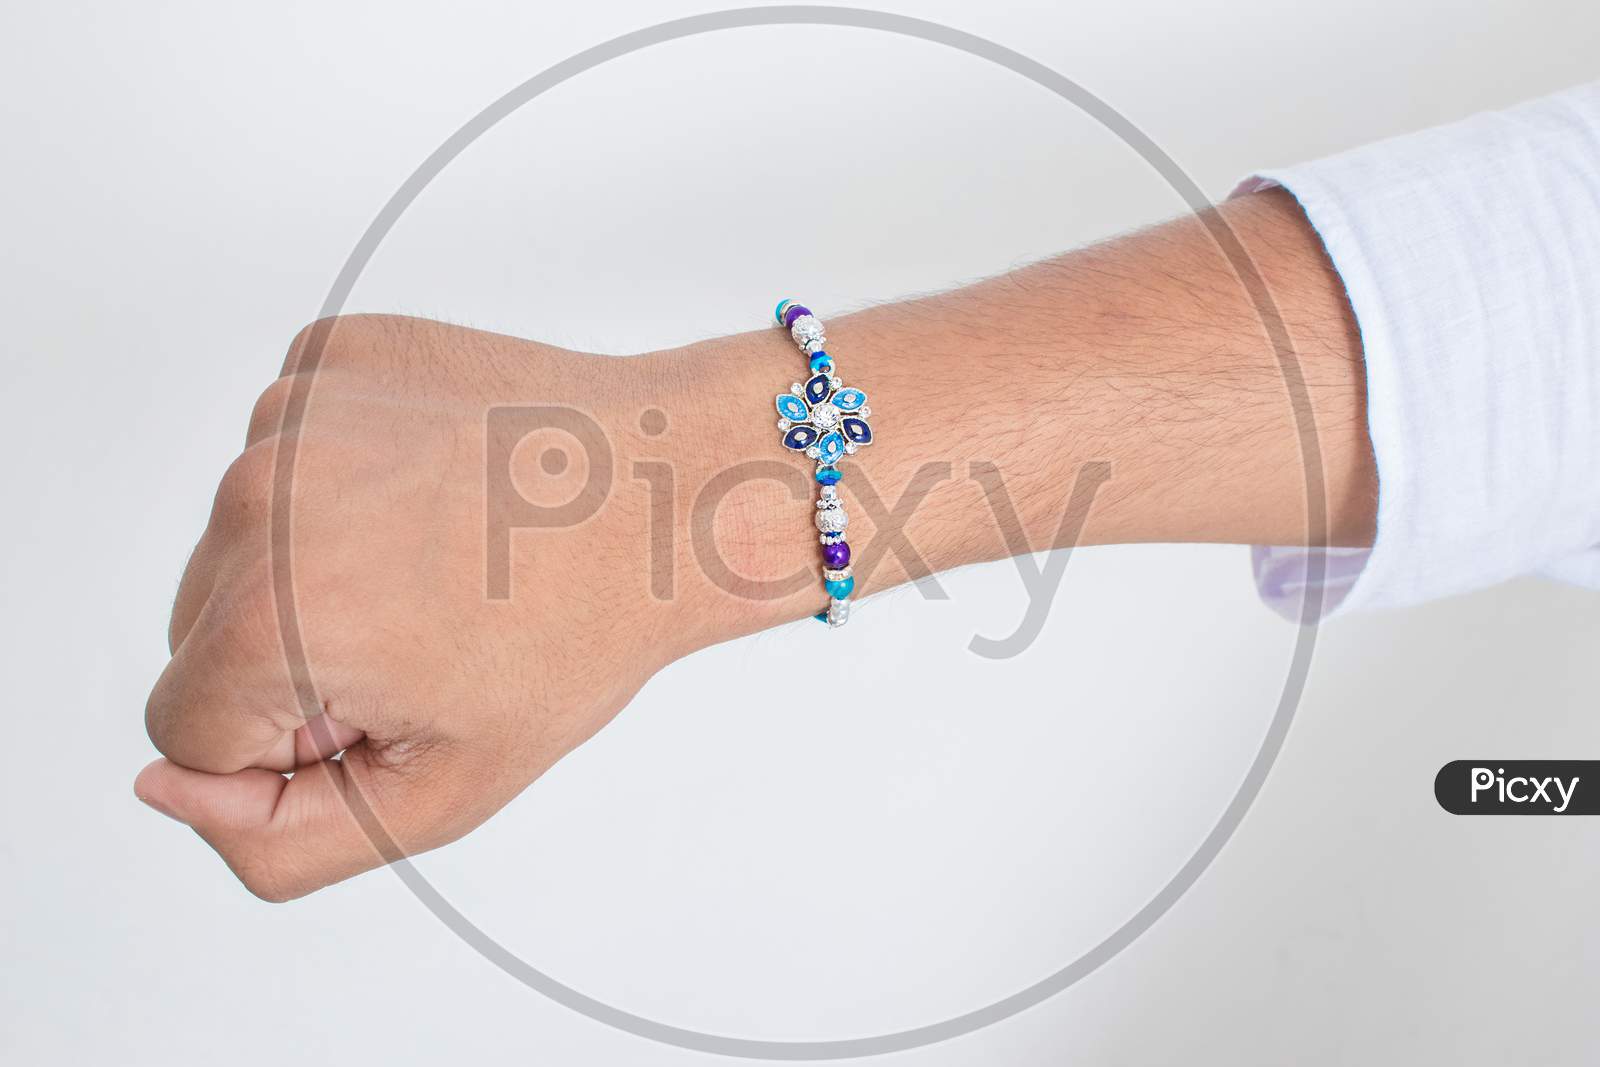 Hand Wearing Beautiful Blue Diamond Design Rakhi On The Occasion Of Raksha Bandhan Over White Background. Indian Festival Celebrated In India To Express Love And Bond Between Brother And Sister.